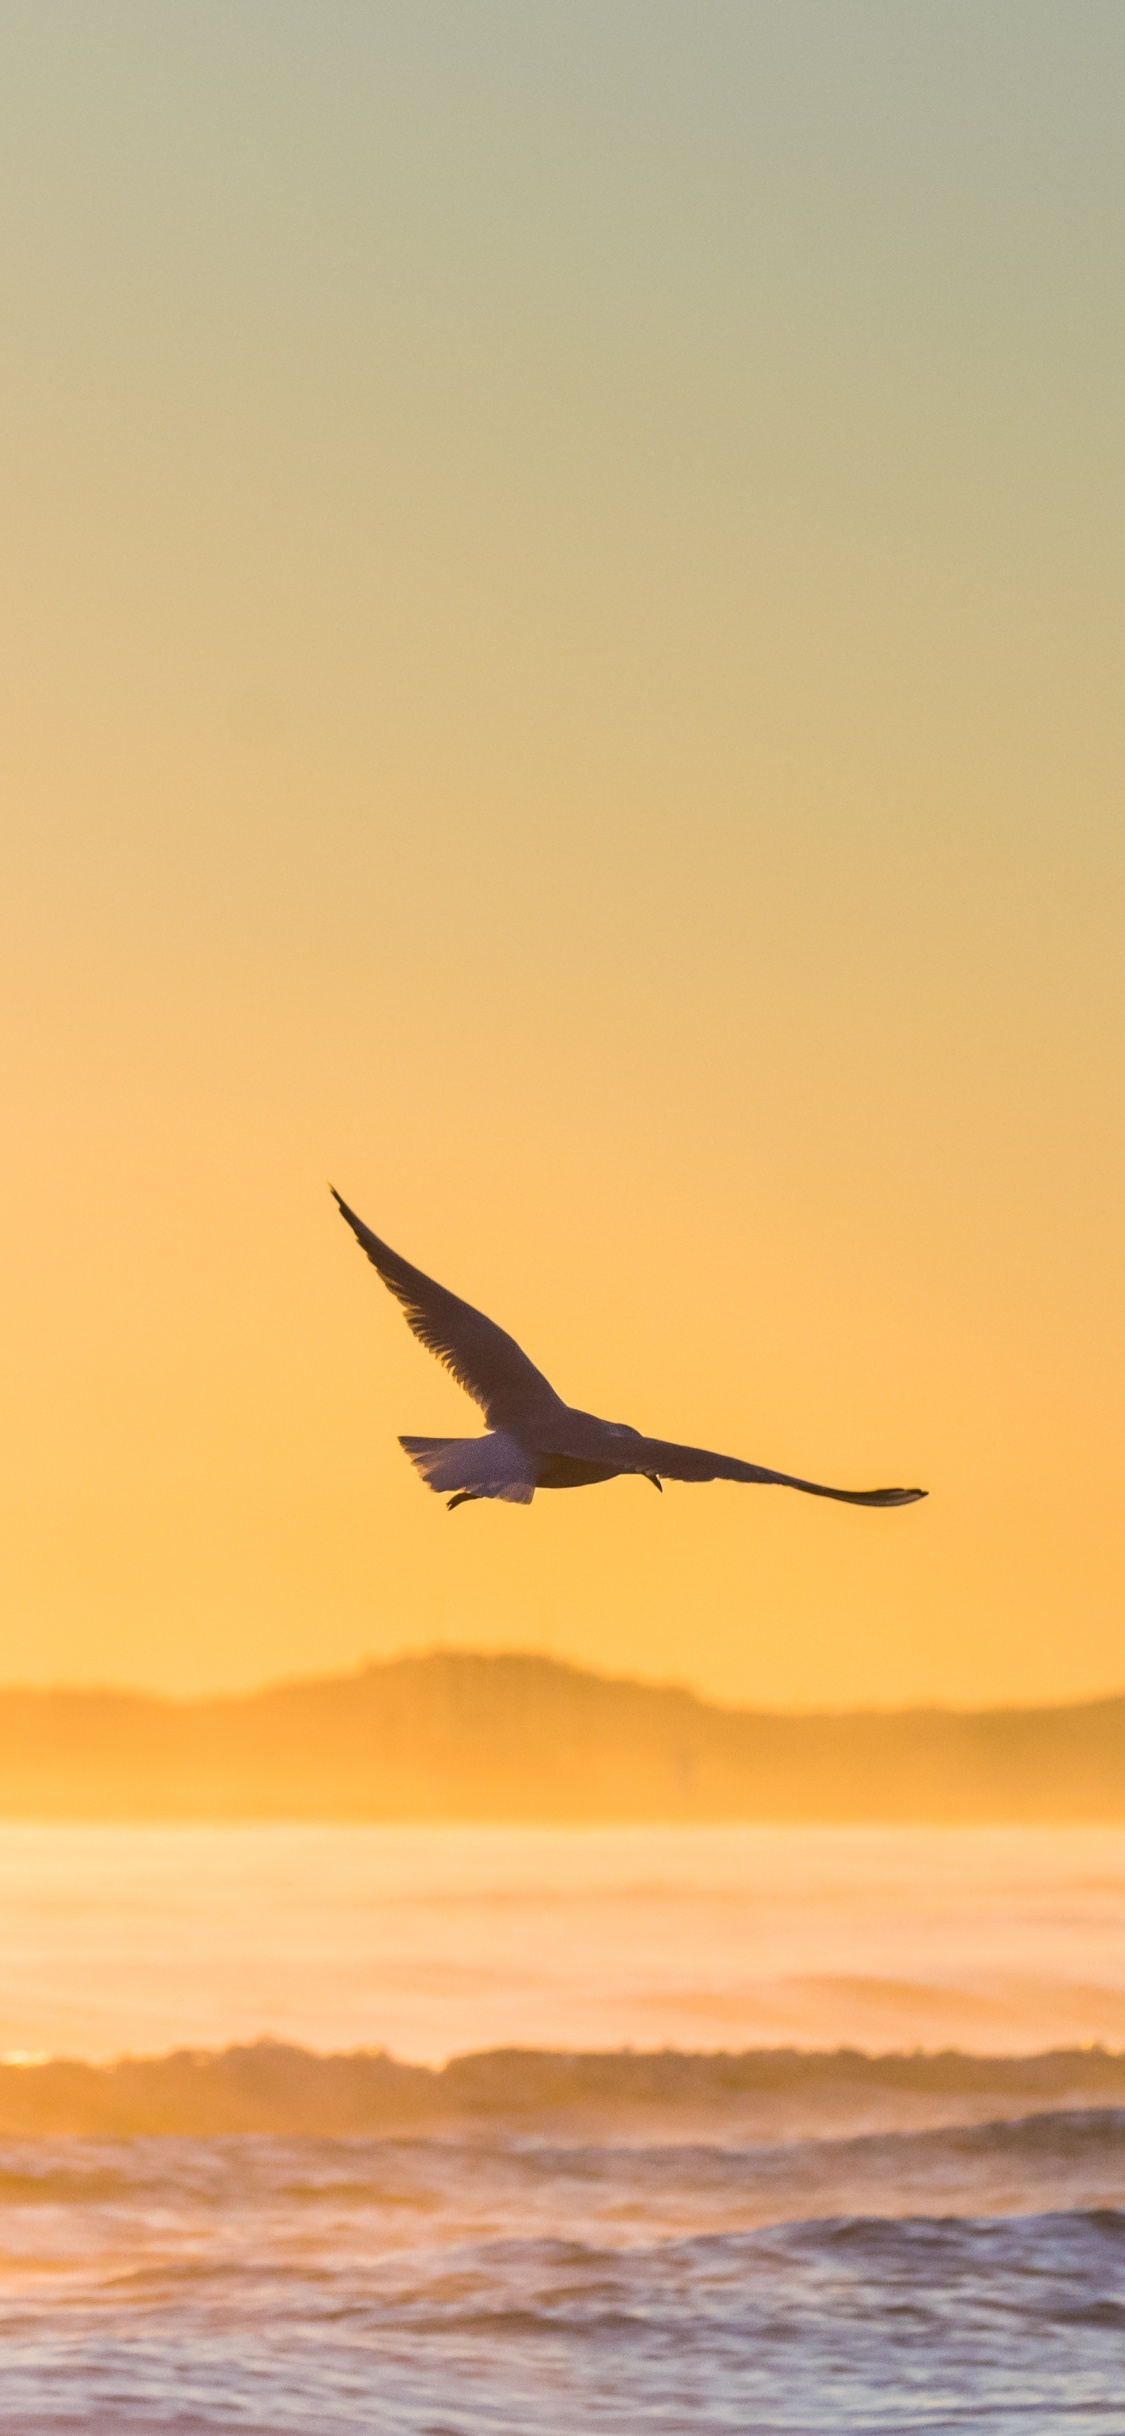 Bird Flying Over The Sea During Sunset. Wallpaper in 1125x2436 Resolution